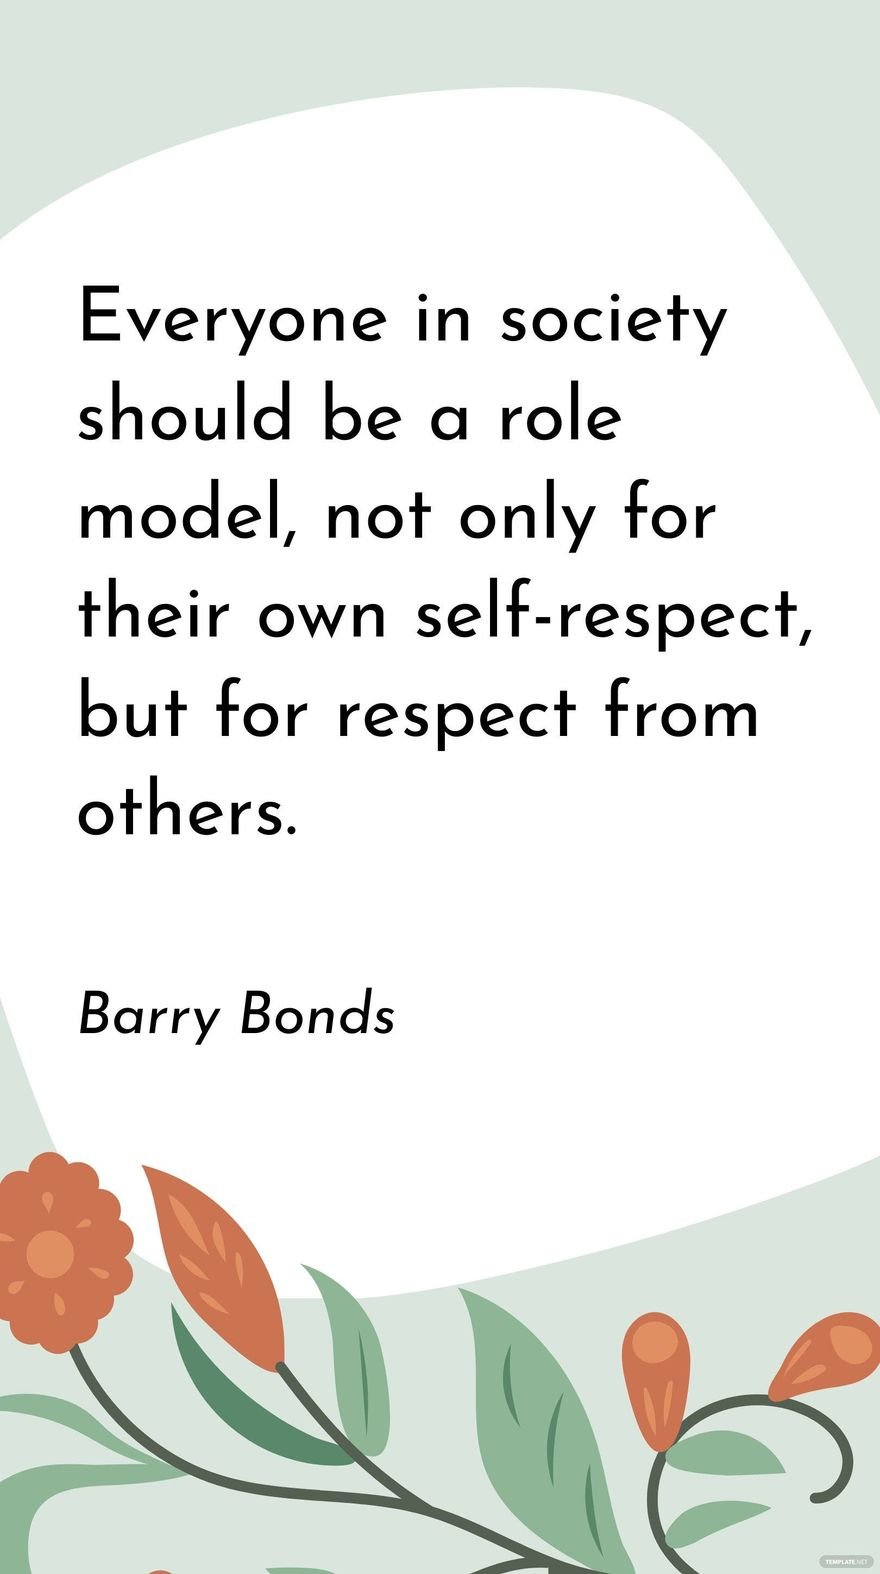 Barry Bonds - Everyone in society should be a role model, not only for their own self-respect, but for respect from others.